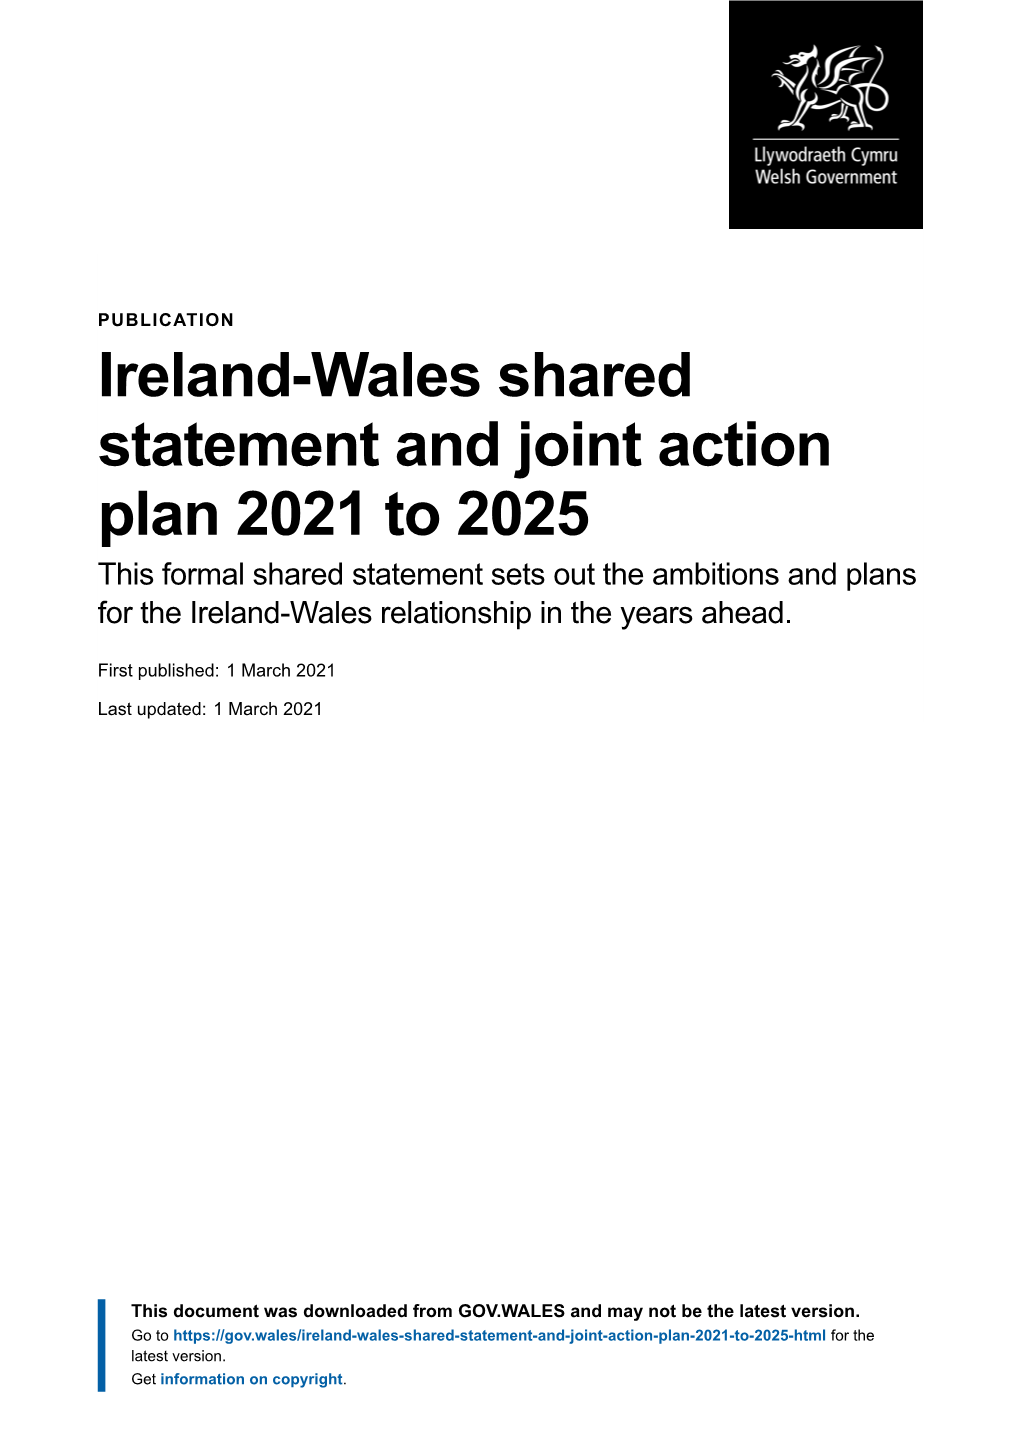 Ireland-Wales Shared Statement and Joint Action Plan 2021